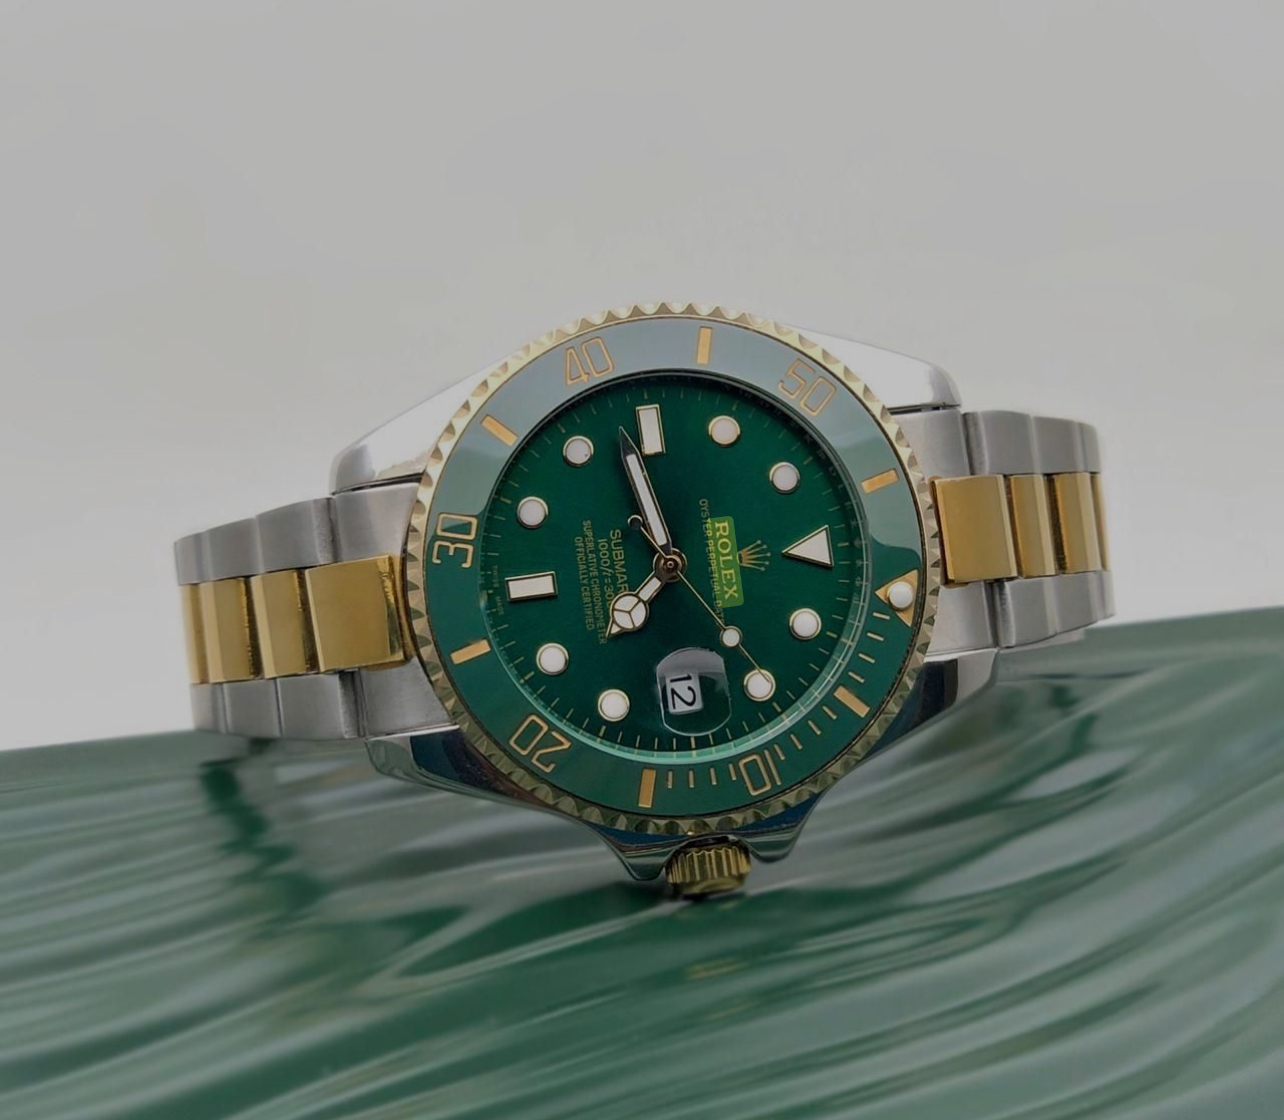 Gold Green Dial Automatic Rolex Submariner Watch For Men (SG270) - KDB Deals